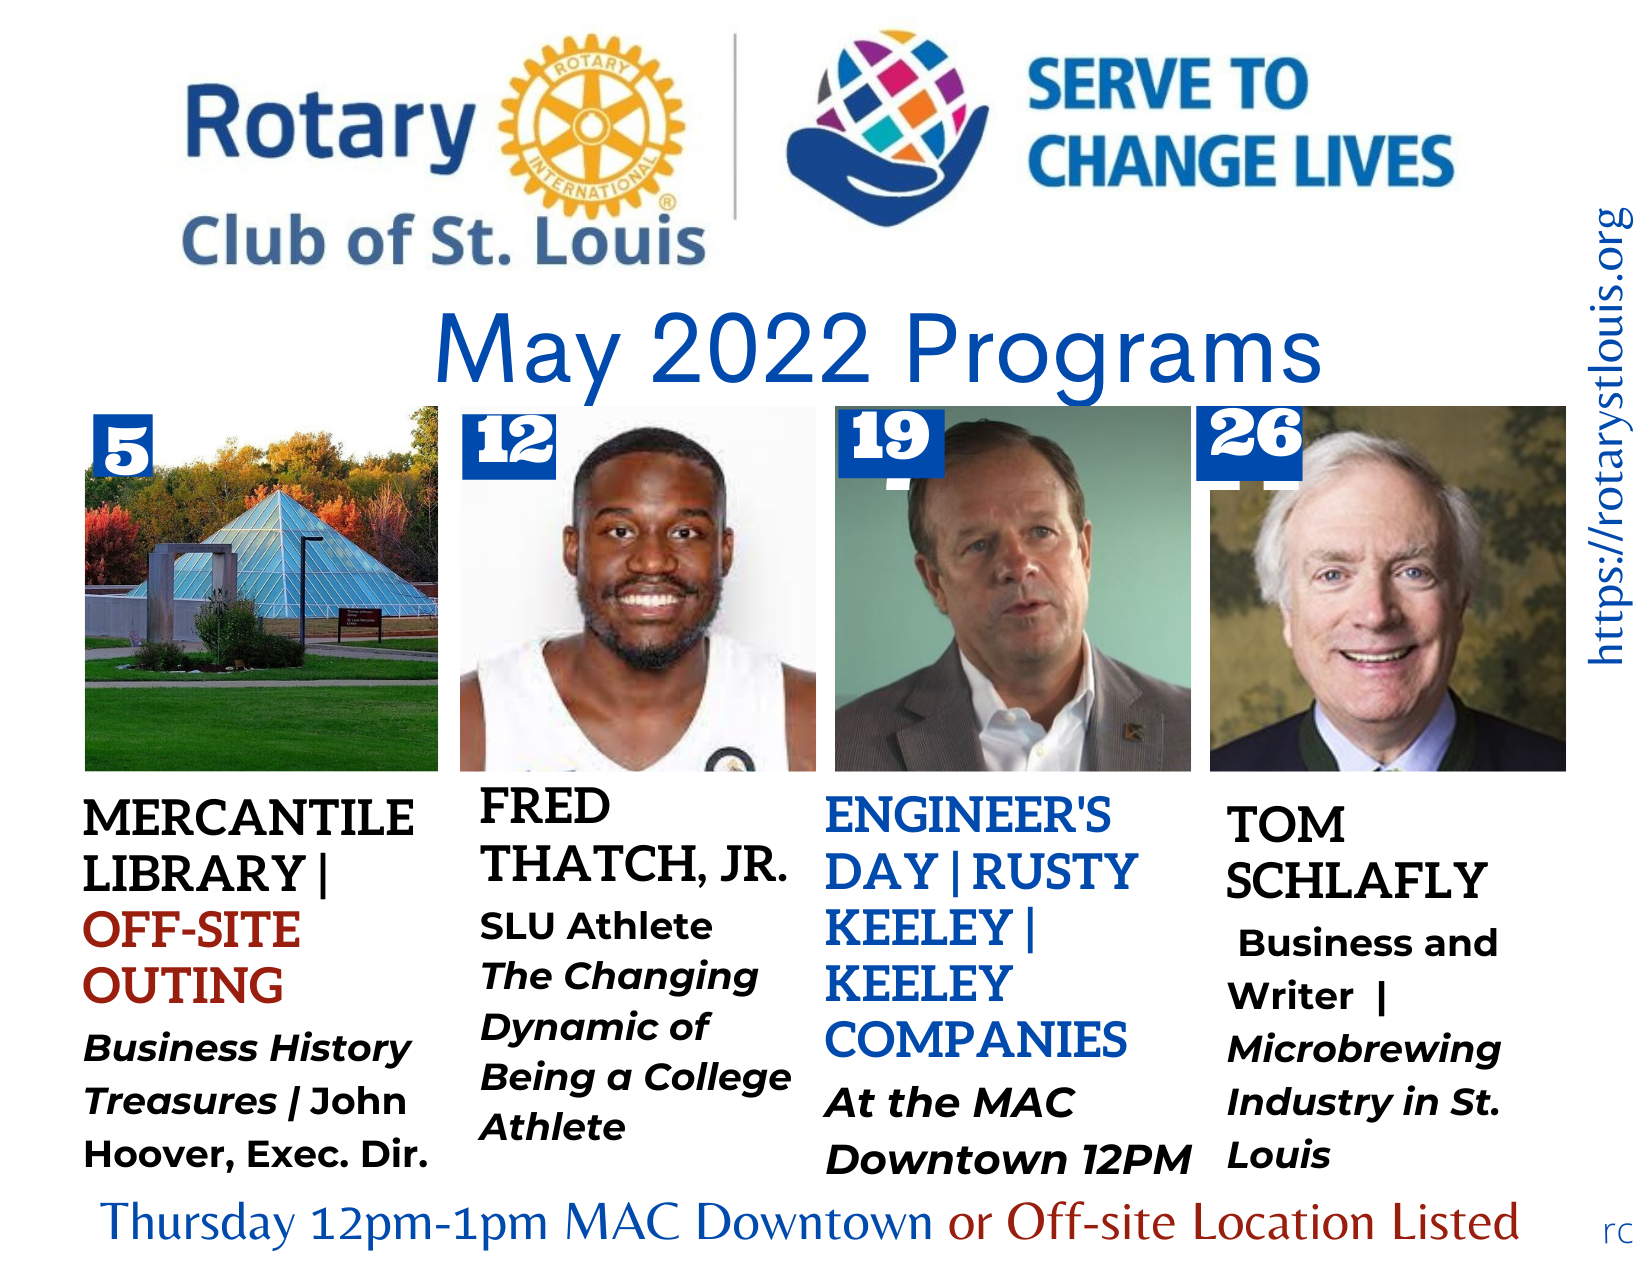 updated May 2022 Programs at St. Louis Rotary